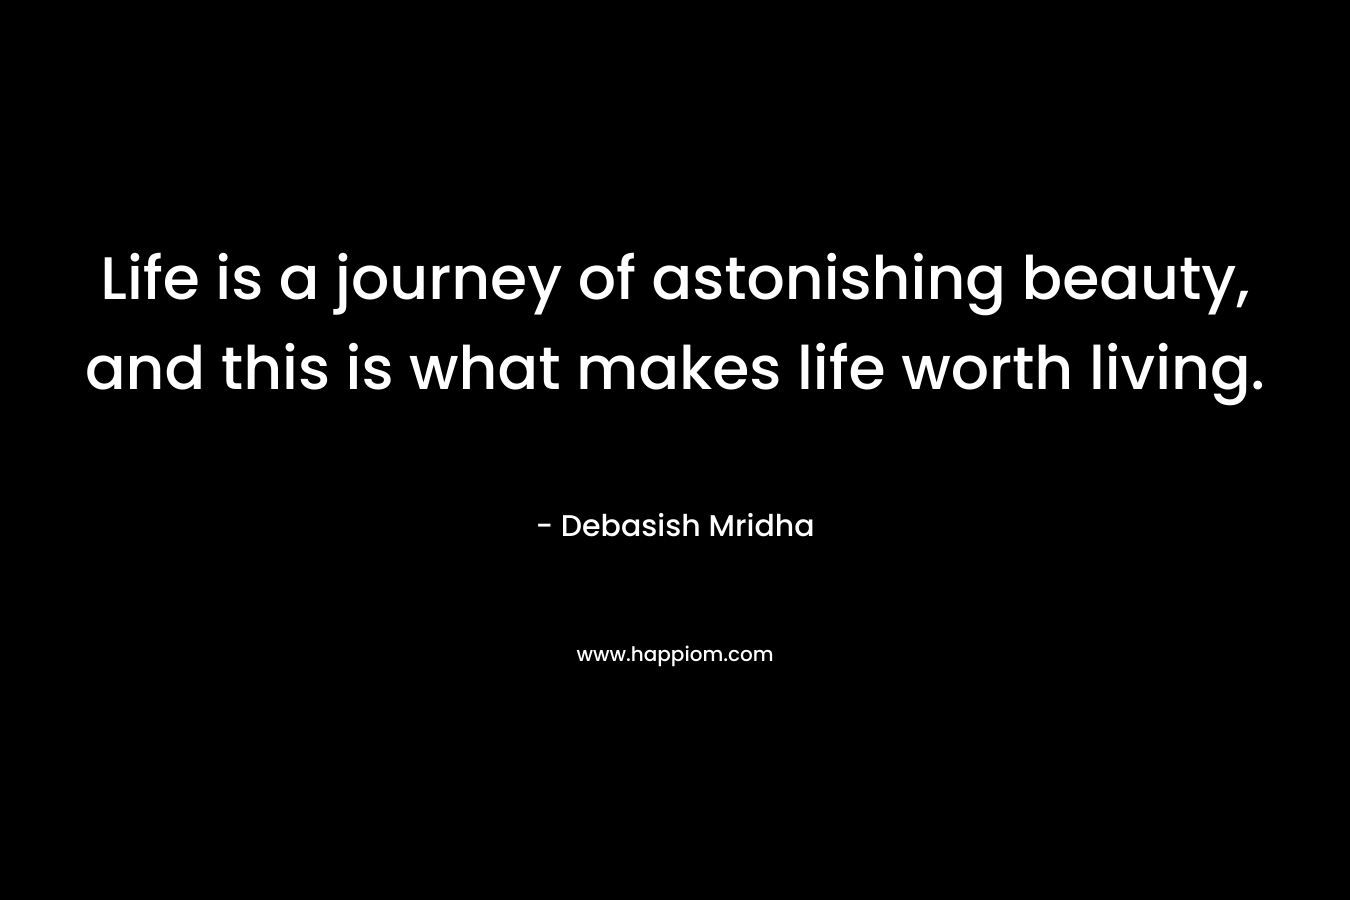 Life is a journey of astonishing beauty, and this is what makes life worth living.